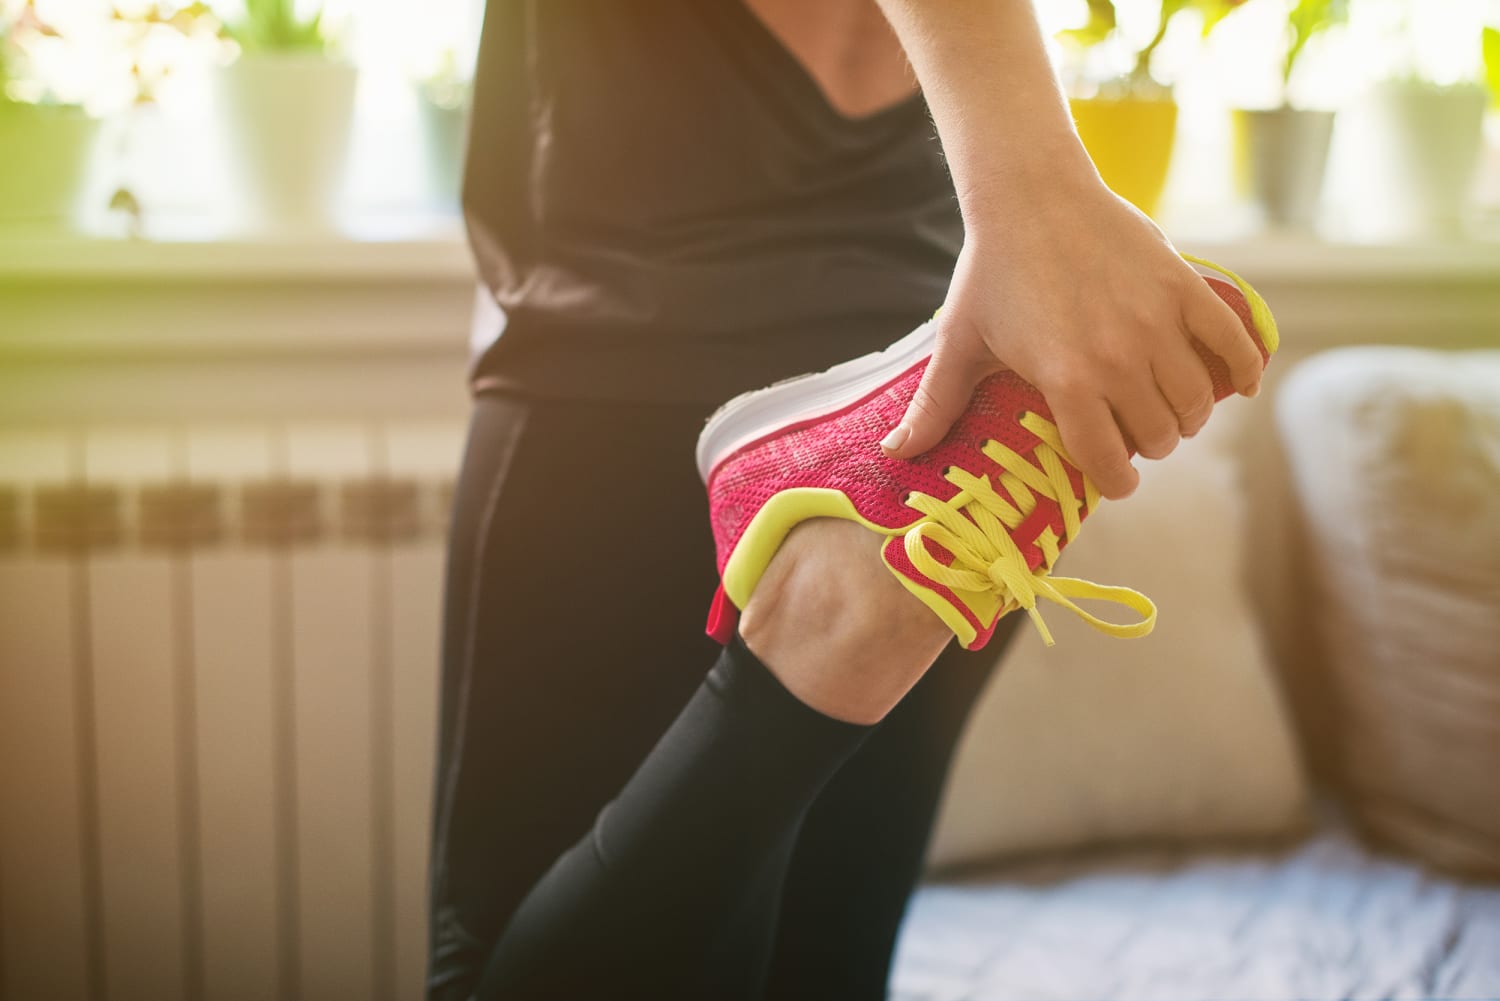 5 Deals to Help You Unwind From Your Workout Session